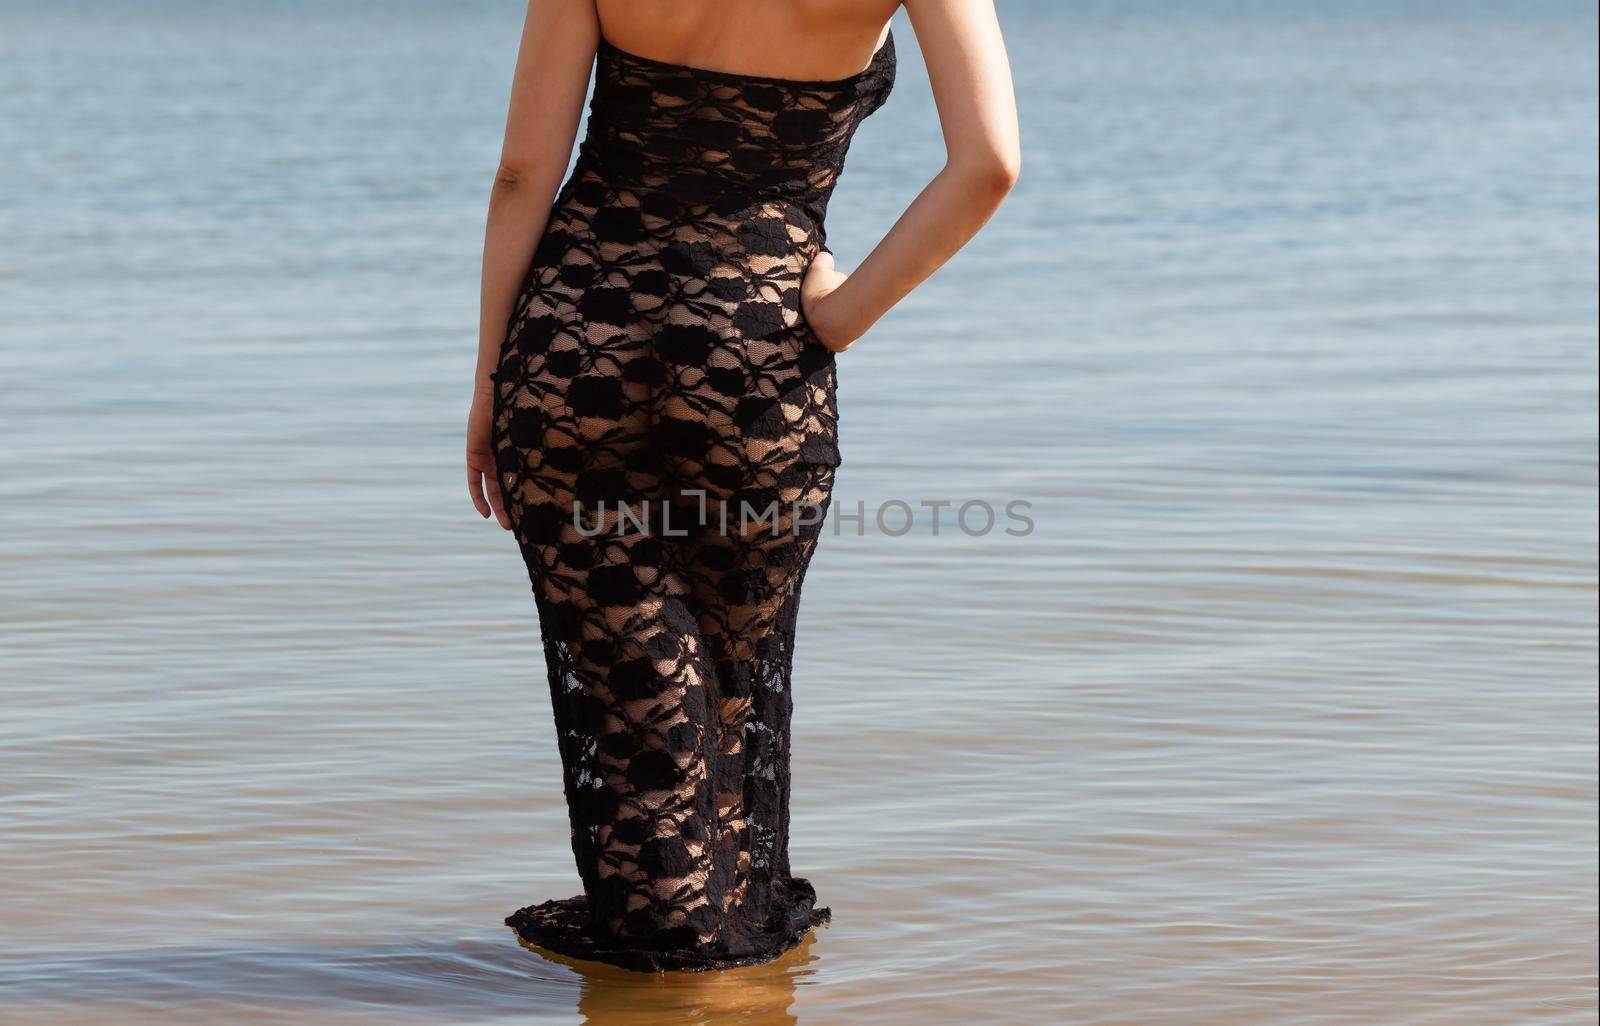 Nude woman in black lace dress against the sea by palinchak